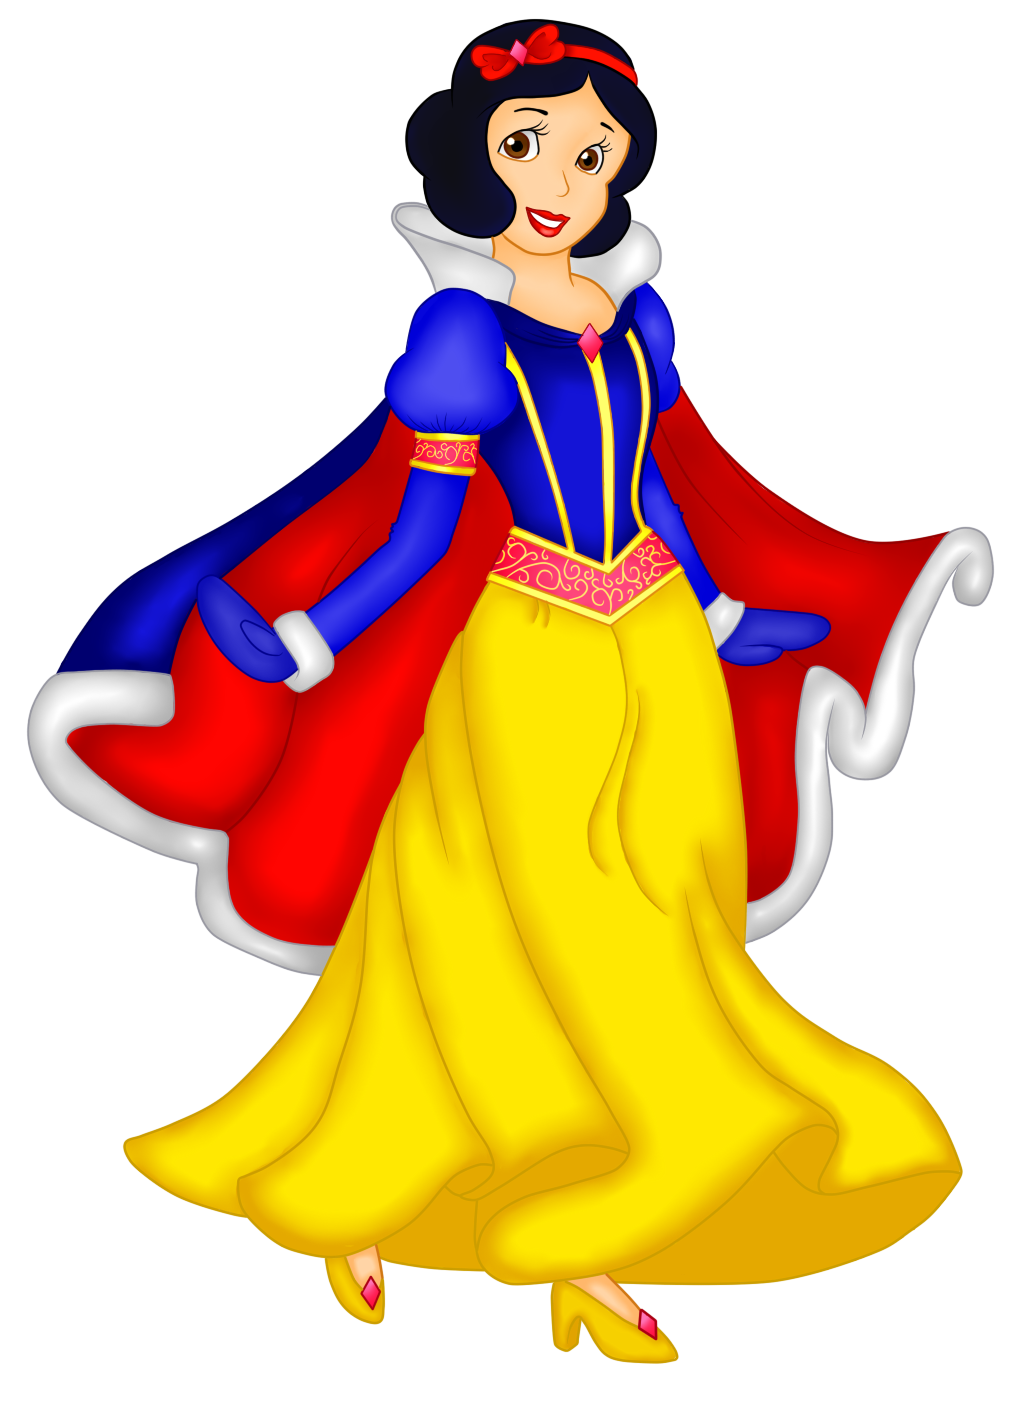 Snow White PNG Transparent Images | PNG All